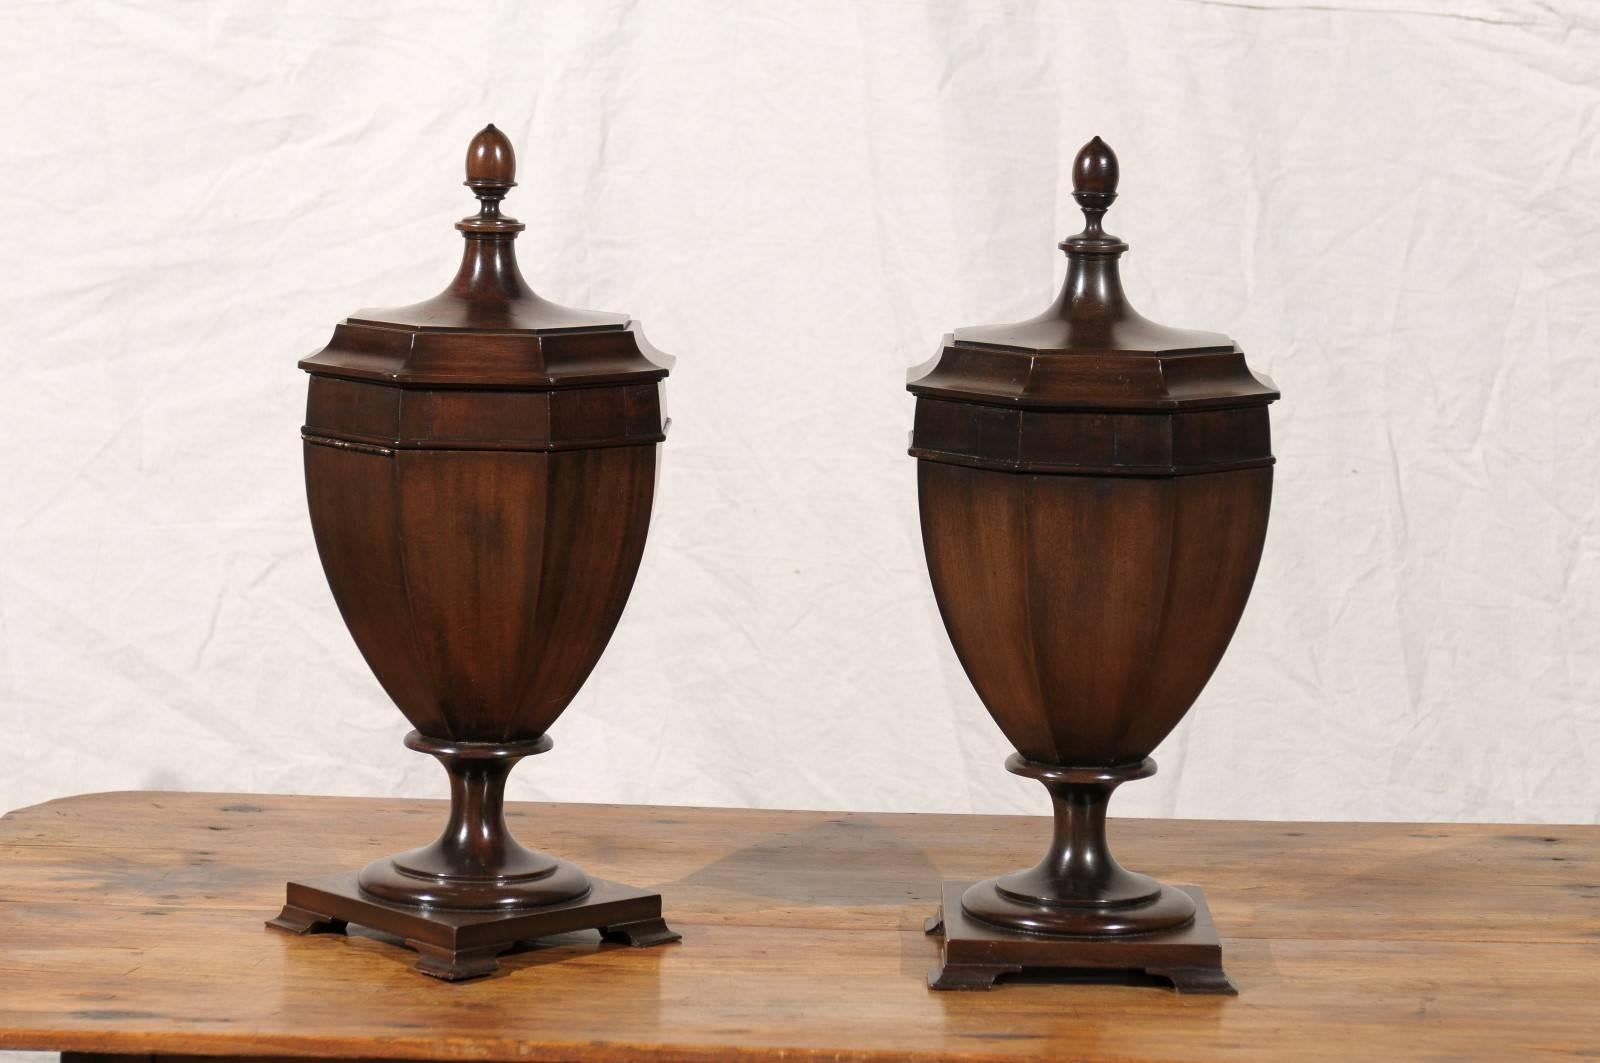 19th-20th century Georgian style mahogany knife urns with octagonal lids.